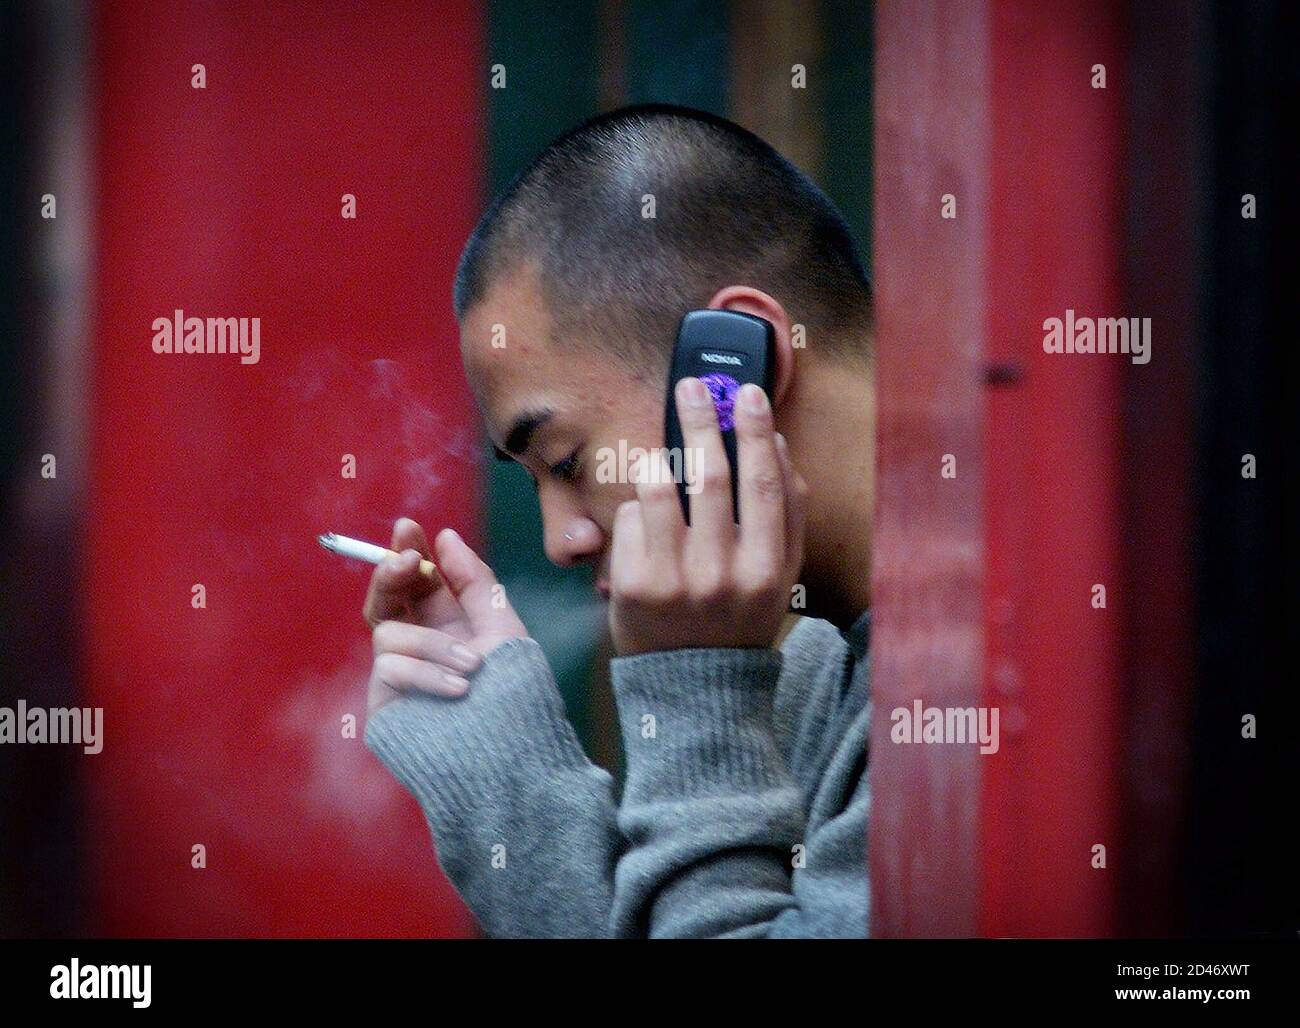 A young man talks on his mobile phone outside a shop in central London, January 25, 2002. Britain launched a 7.4 million pound ($10.5 million) research programme on Friday to investigate whether mobile phones pose a health risk. REUTERS/Ferran Paredes  FP/ASA Stock Photo